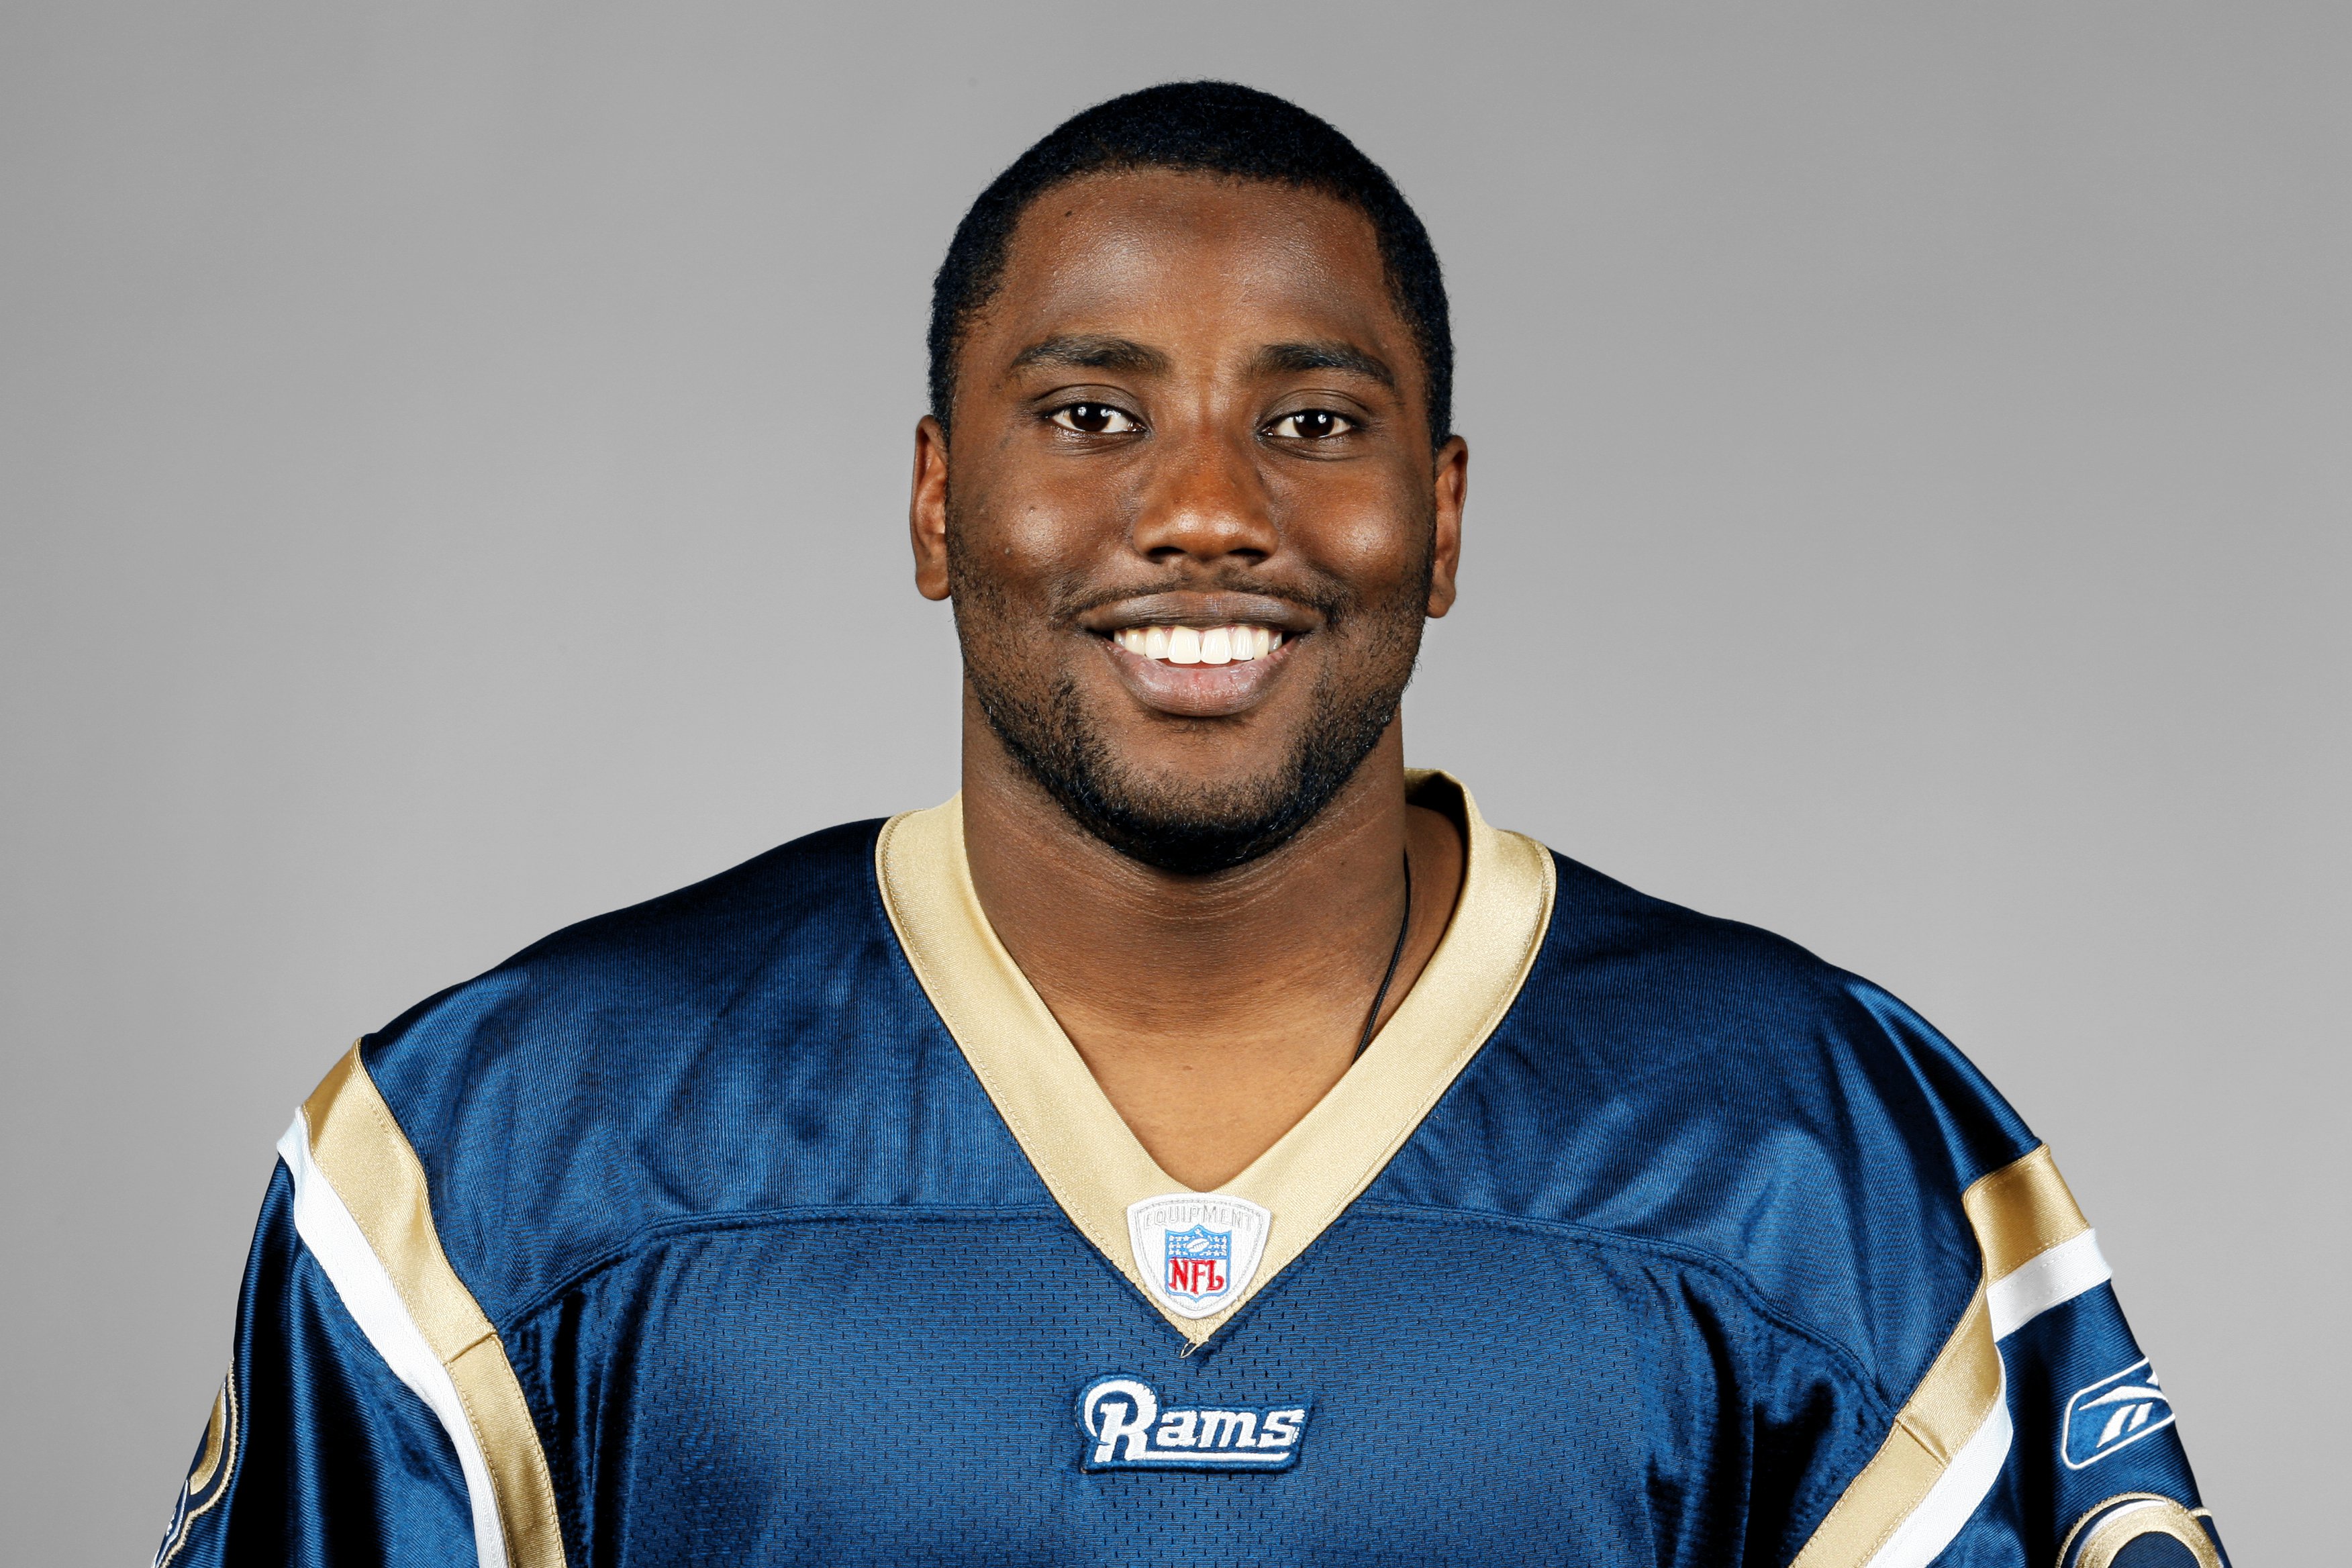 Football star John David Washington of the St. Louis Rams poses for his 2006 NFL headshot at photo day on April 1, 2006 in St. Louis, Missouri. ┃Source: Getty Images